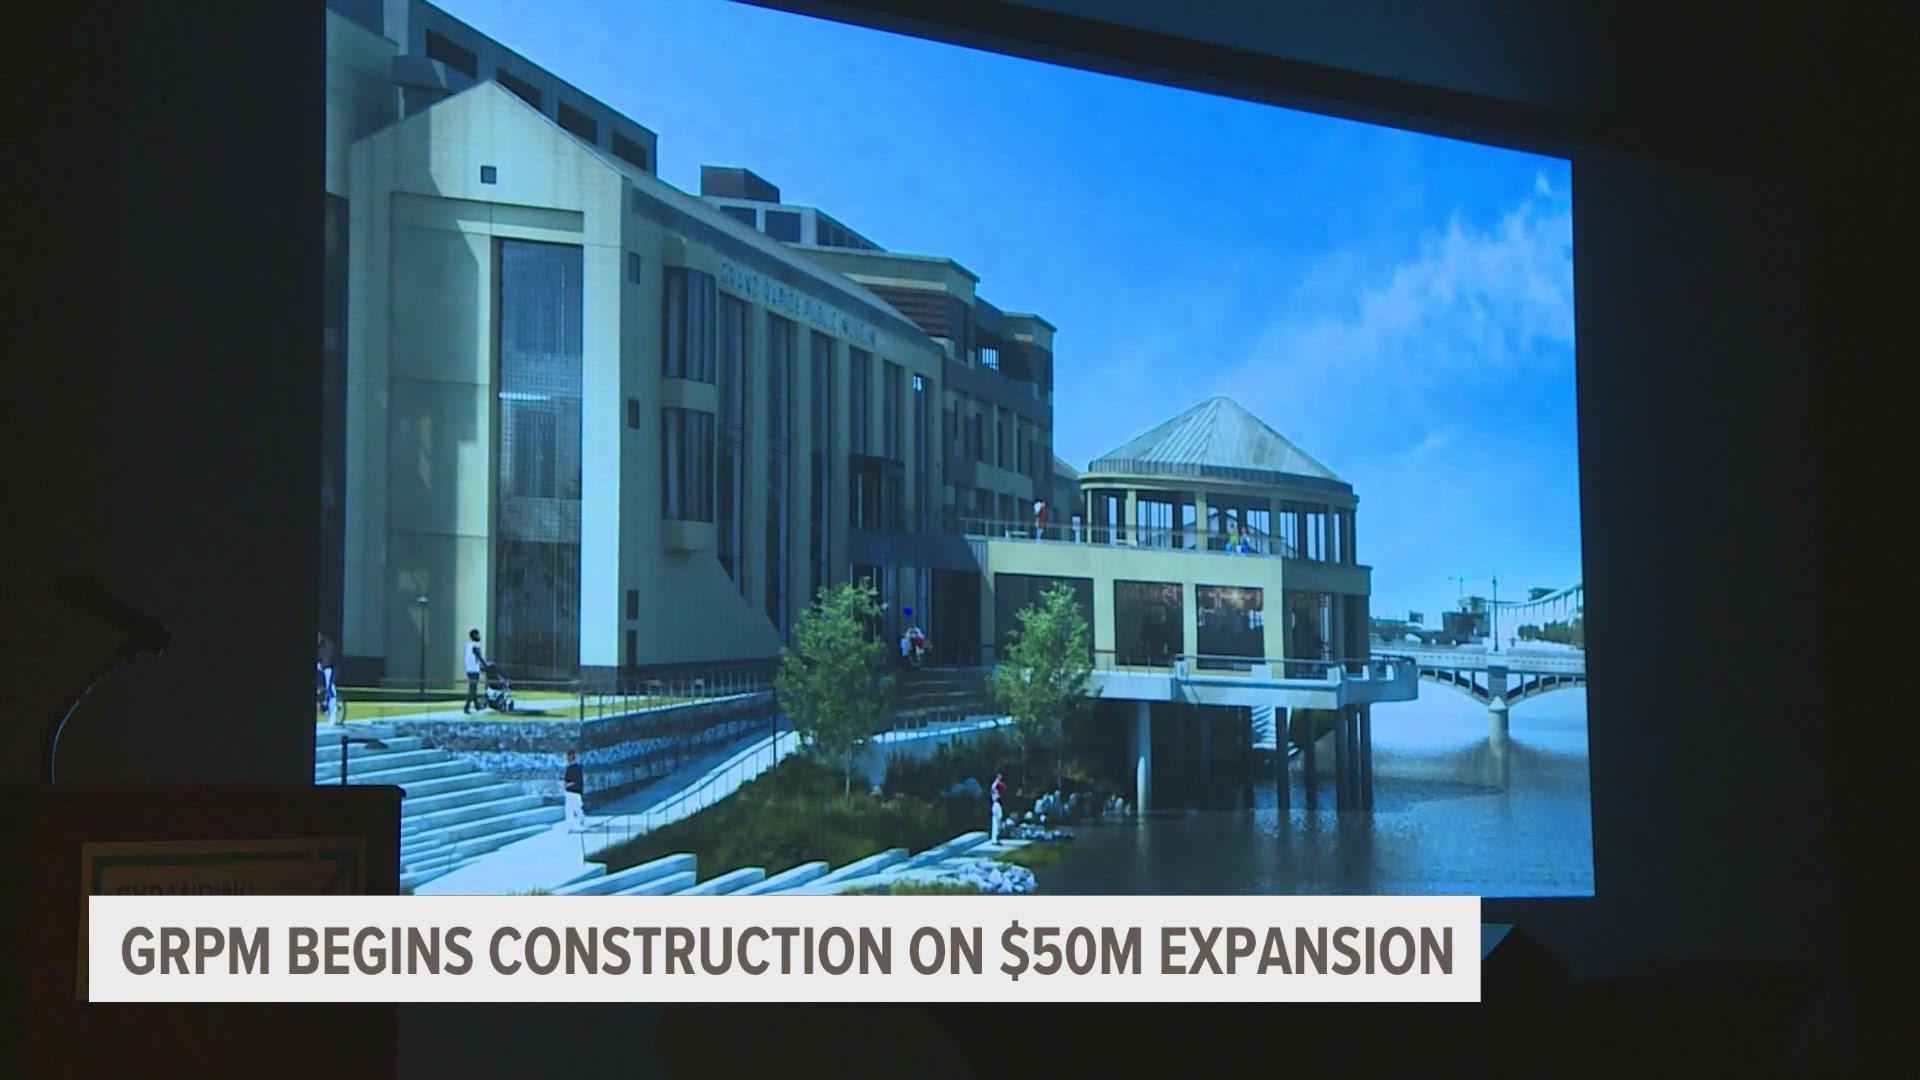 The museum announced the expansion project in August, saying that a major focus will be on increased river access.